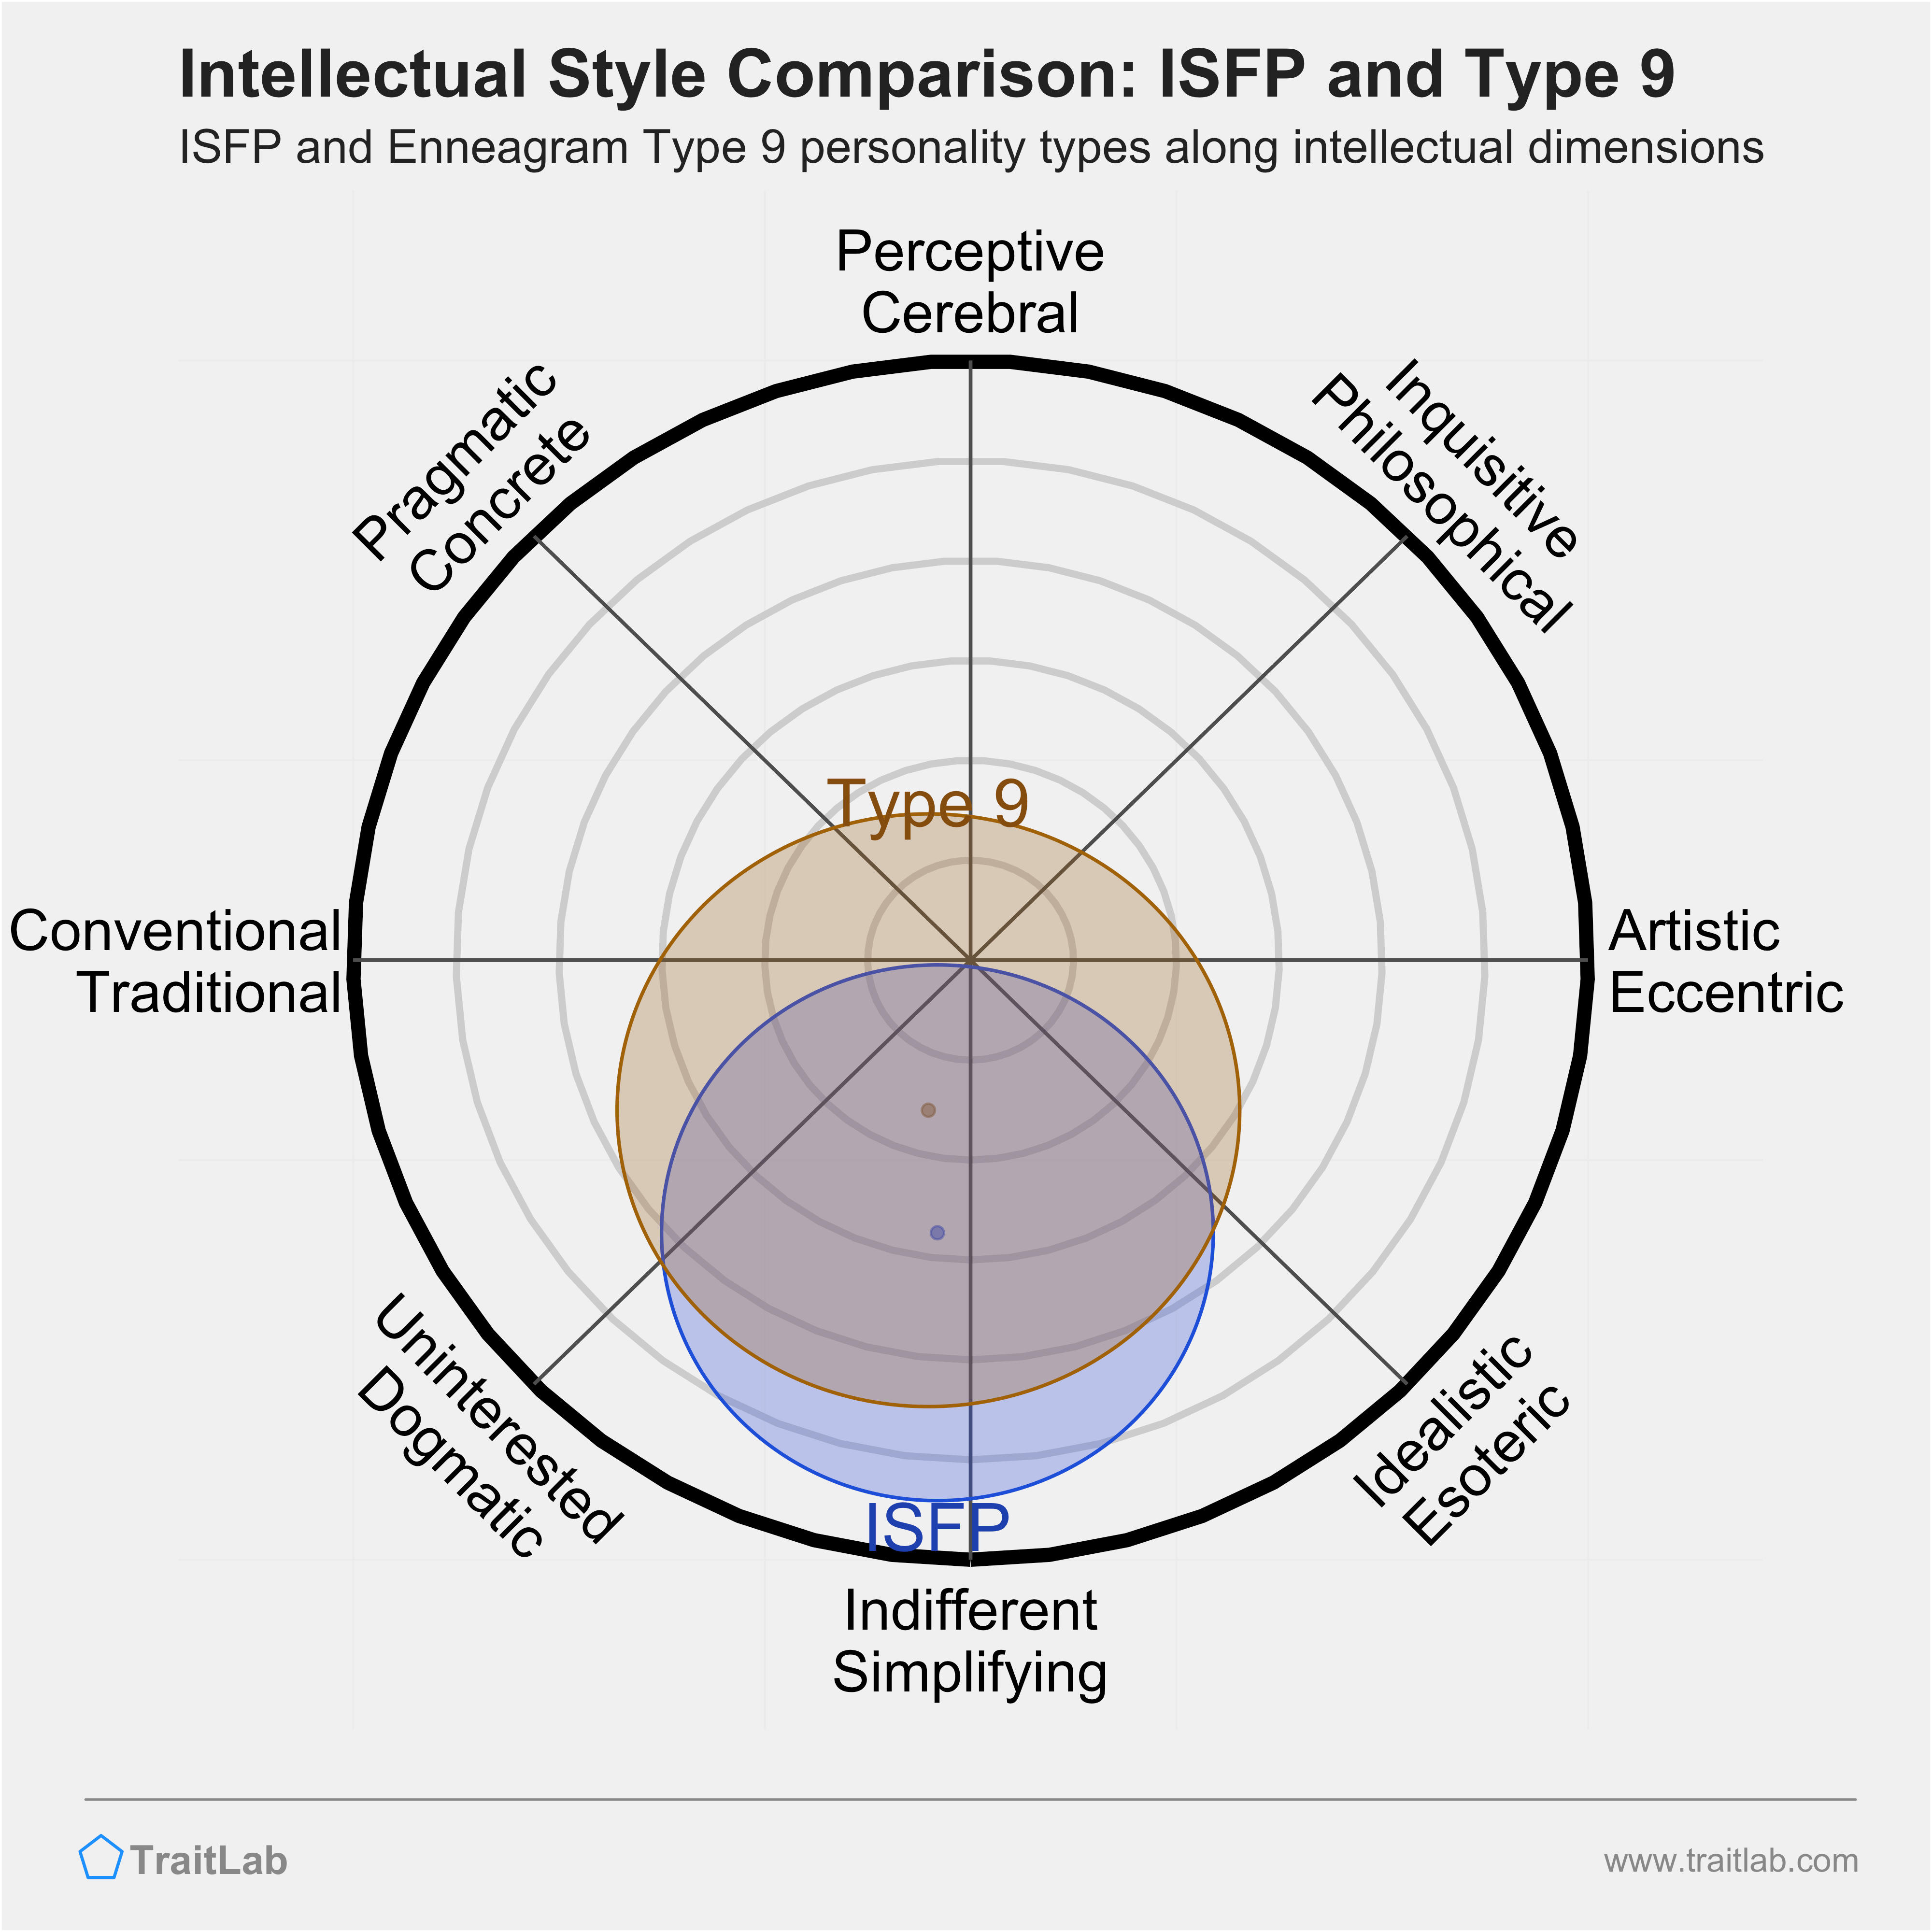 ISFP and Type 9 comparison across intellectual dimensions